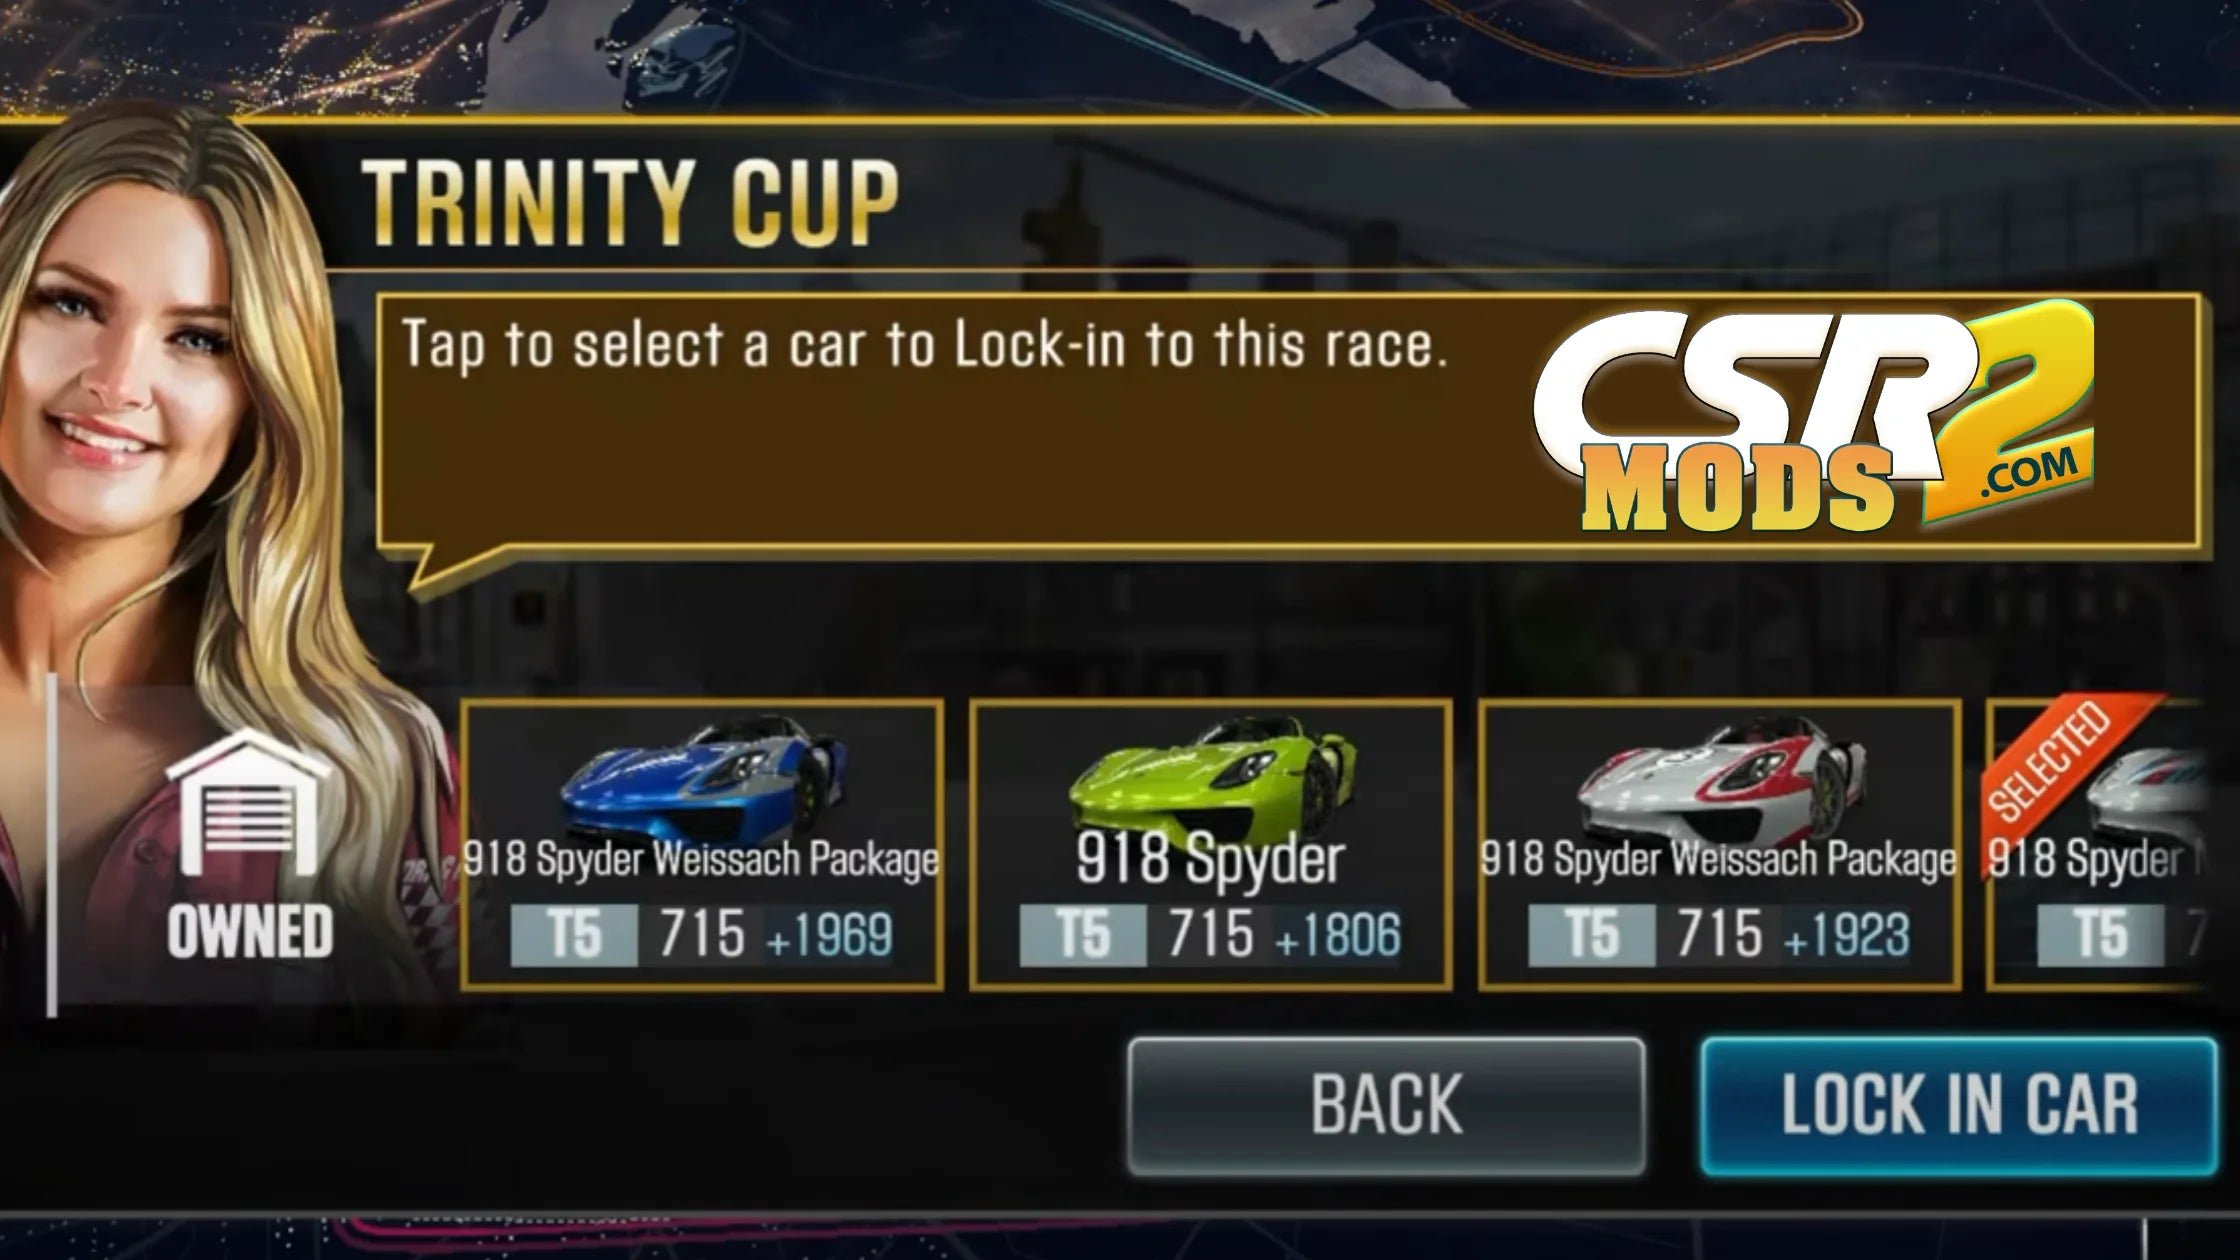 CSR2MODS Presents: The Exciting Trinity Cup Event!